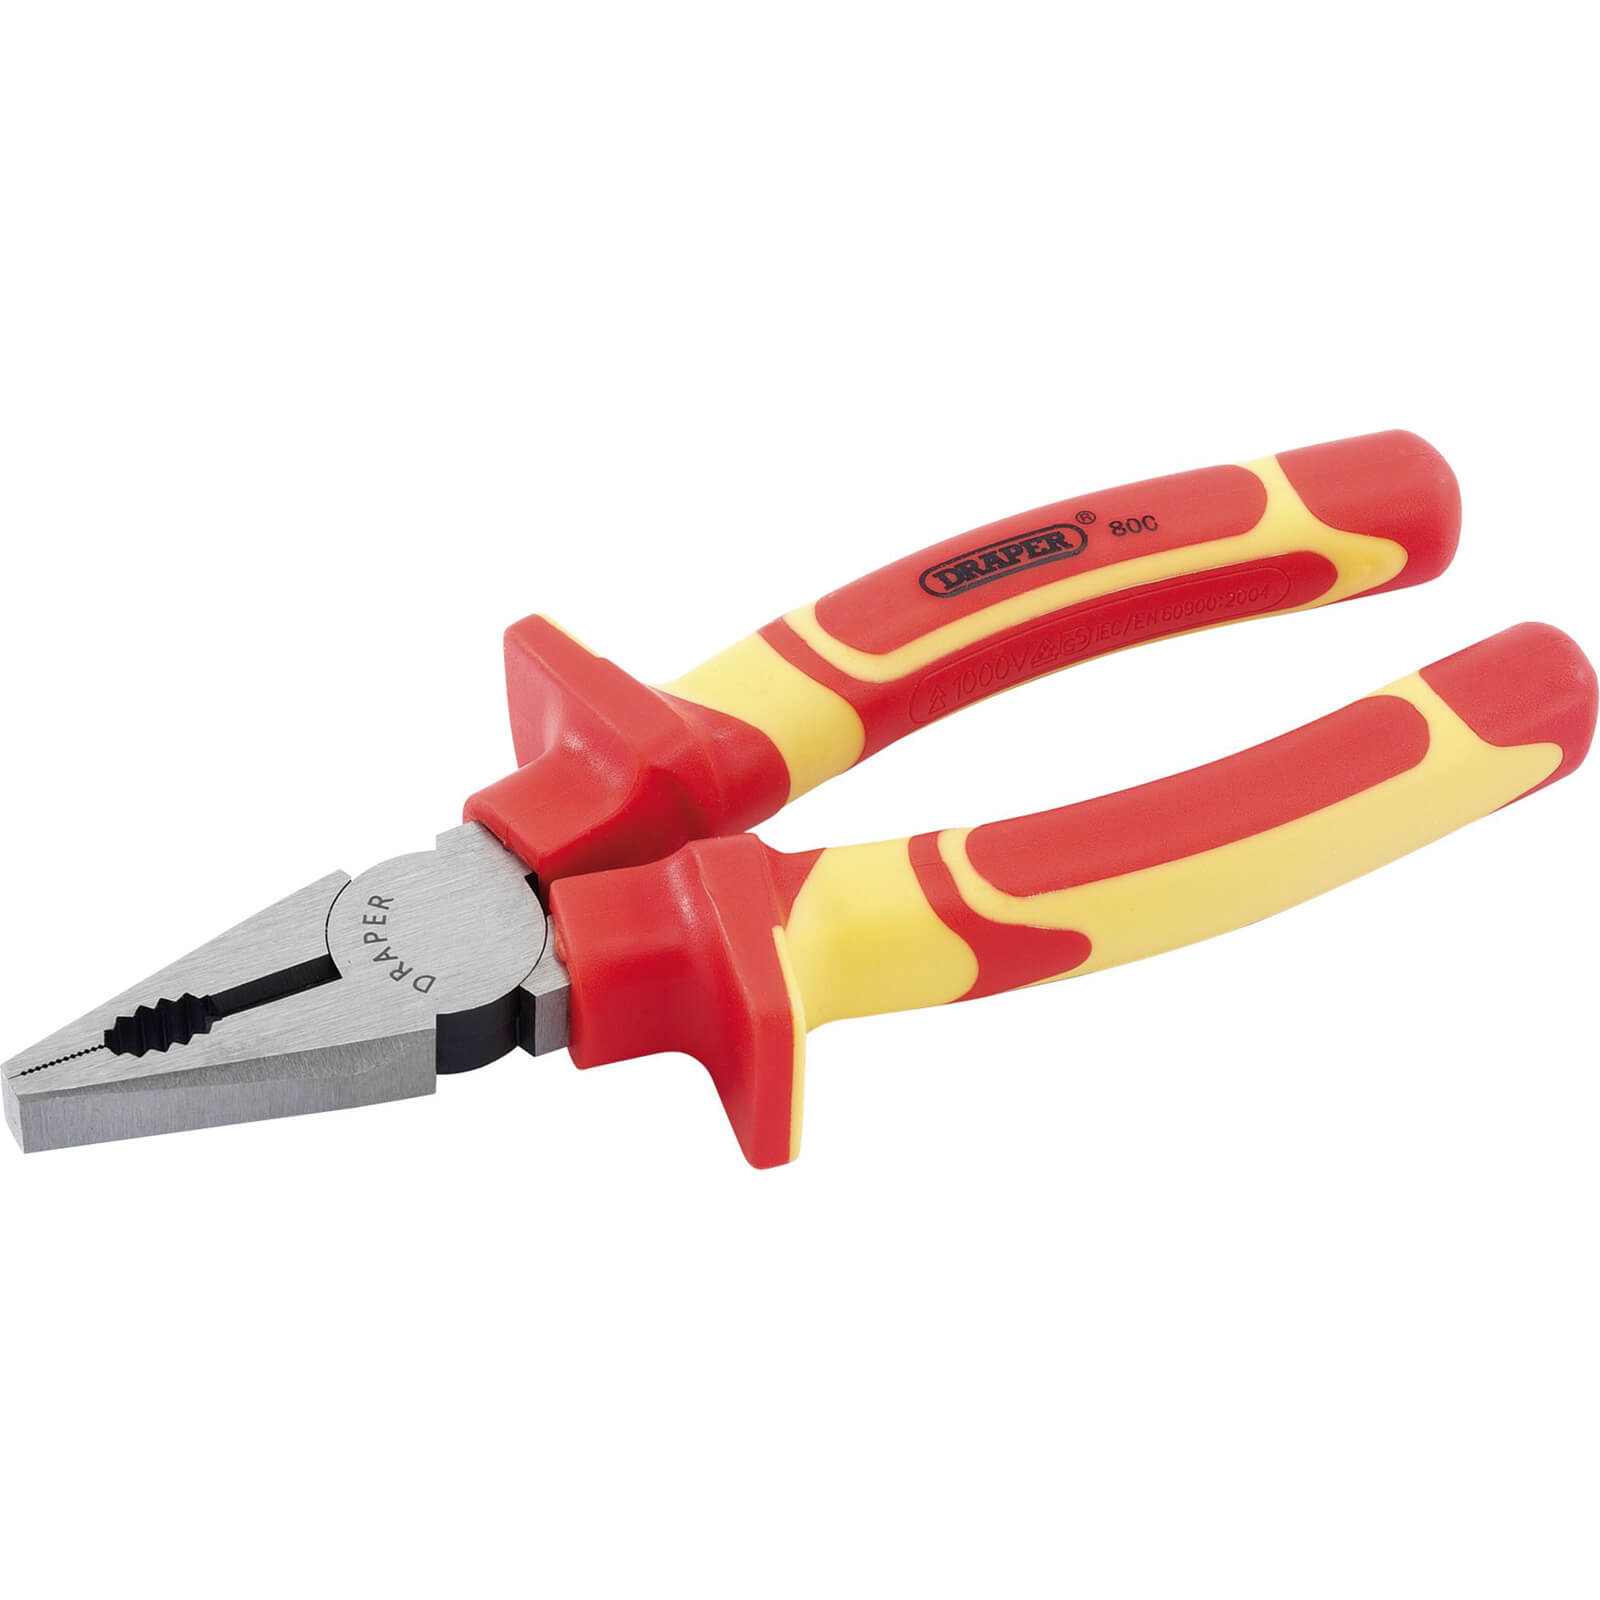 Photo of Draper Vde Insulated Combination Pliers 180mm